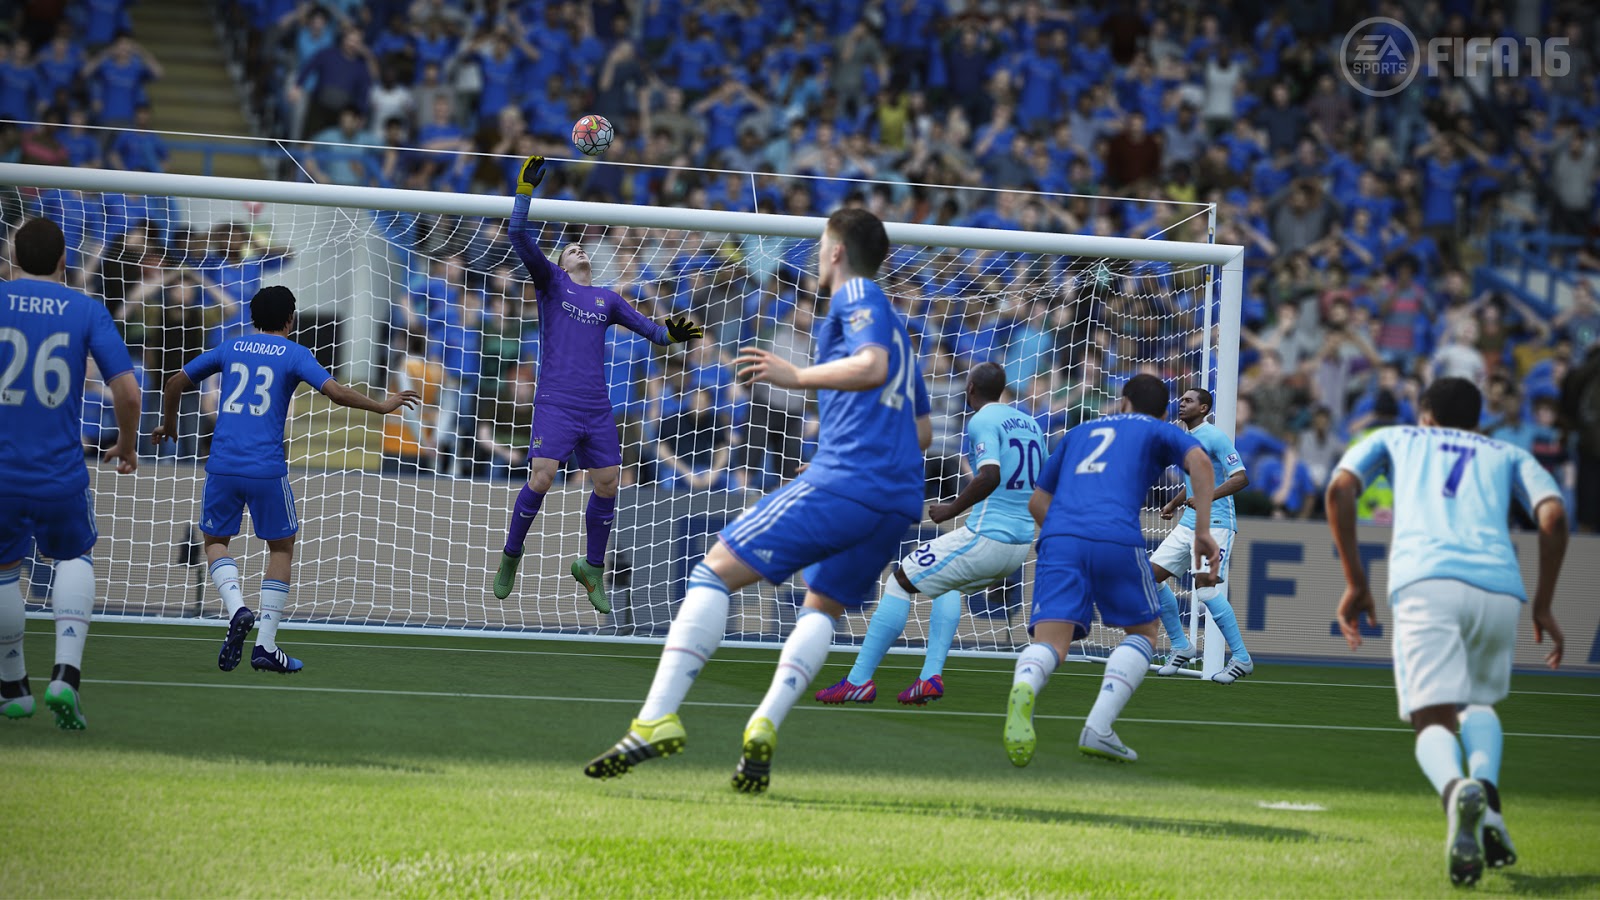 fifa 16 download pc full game free